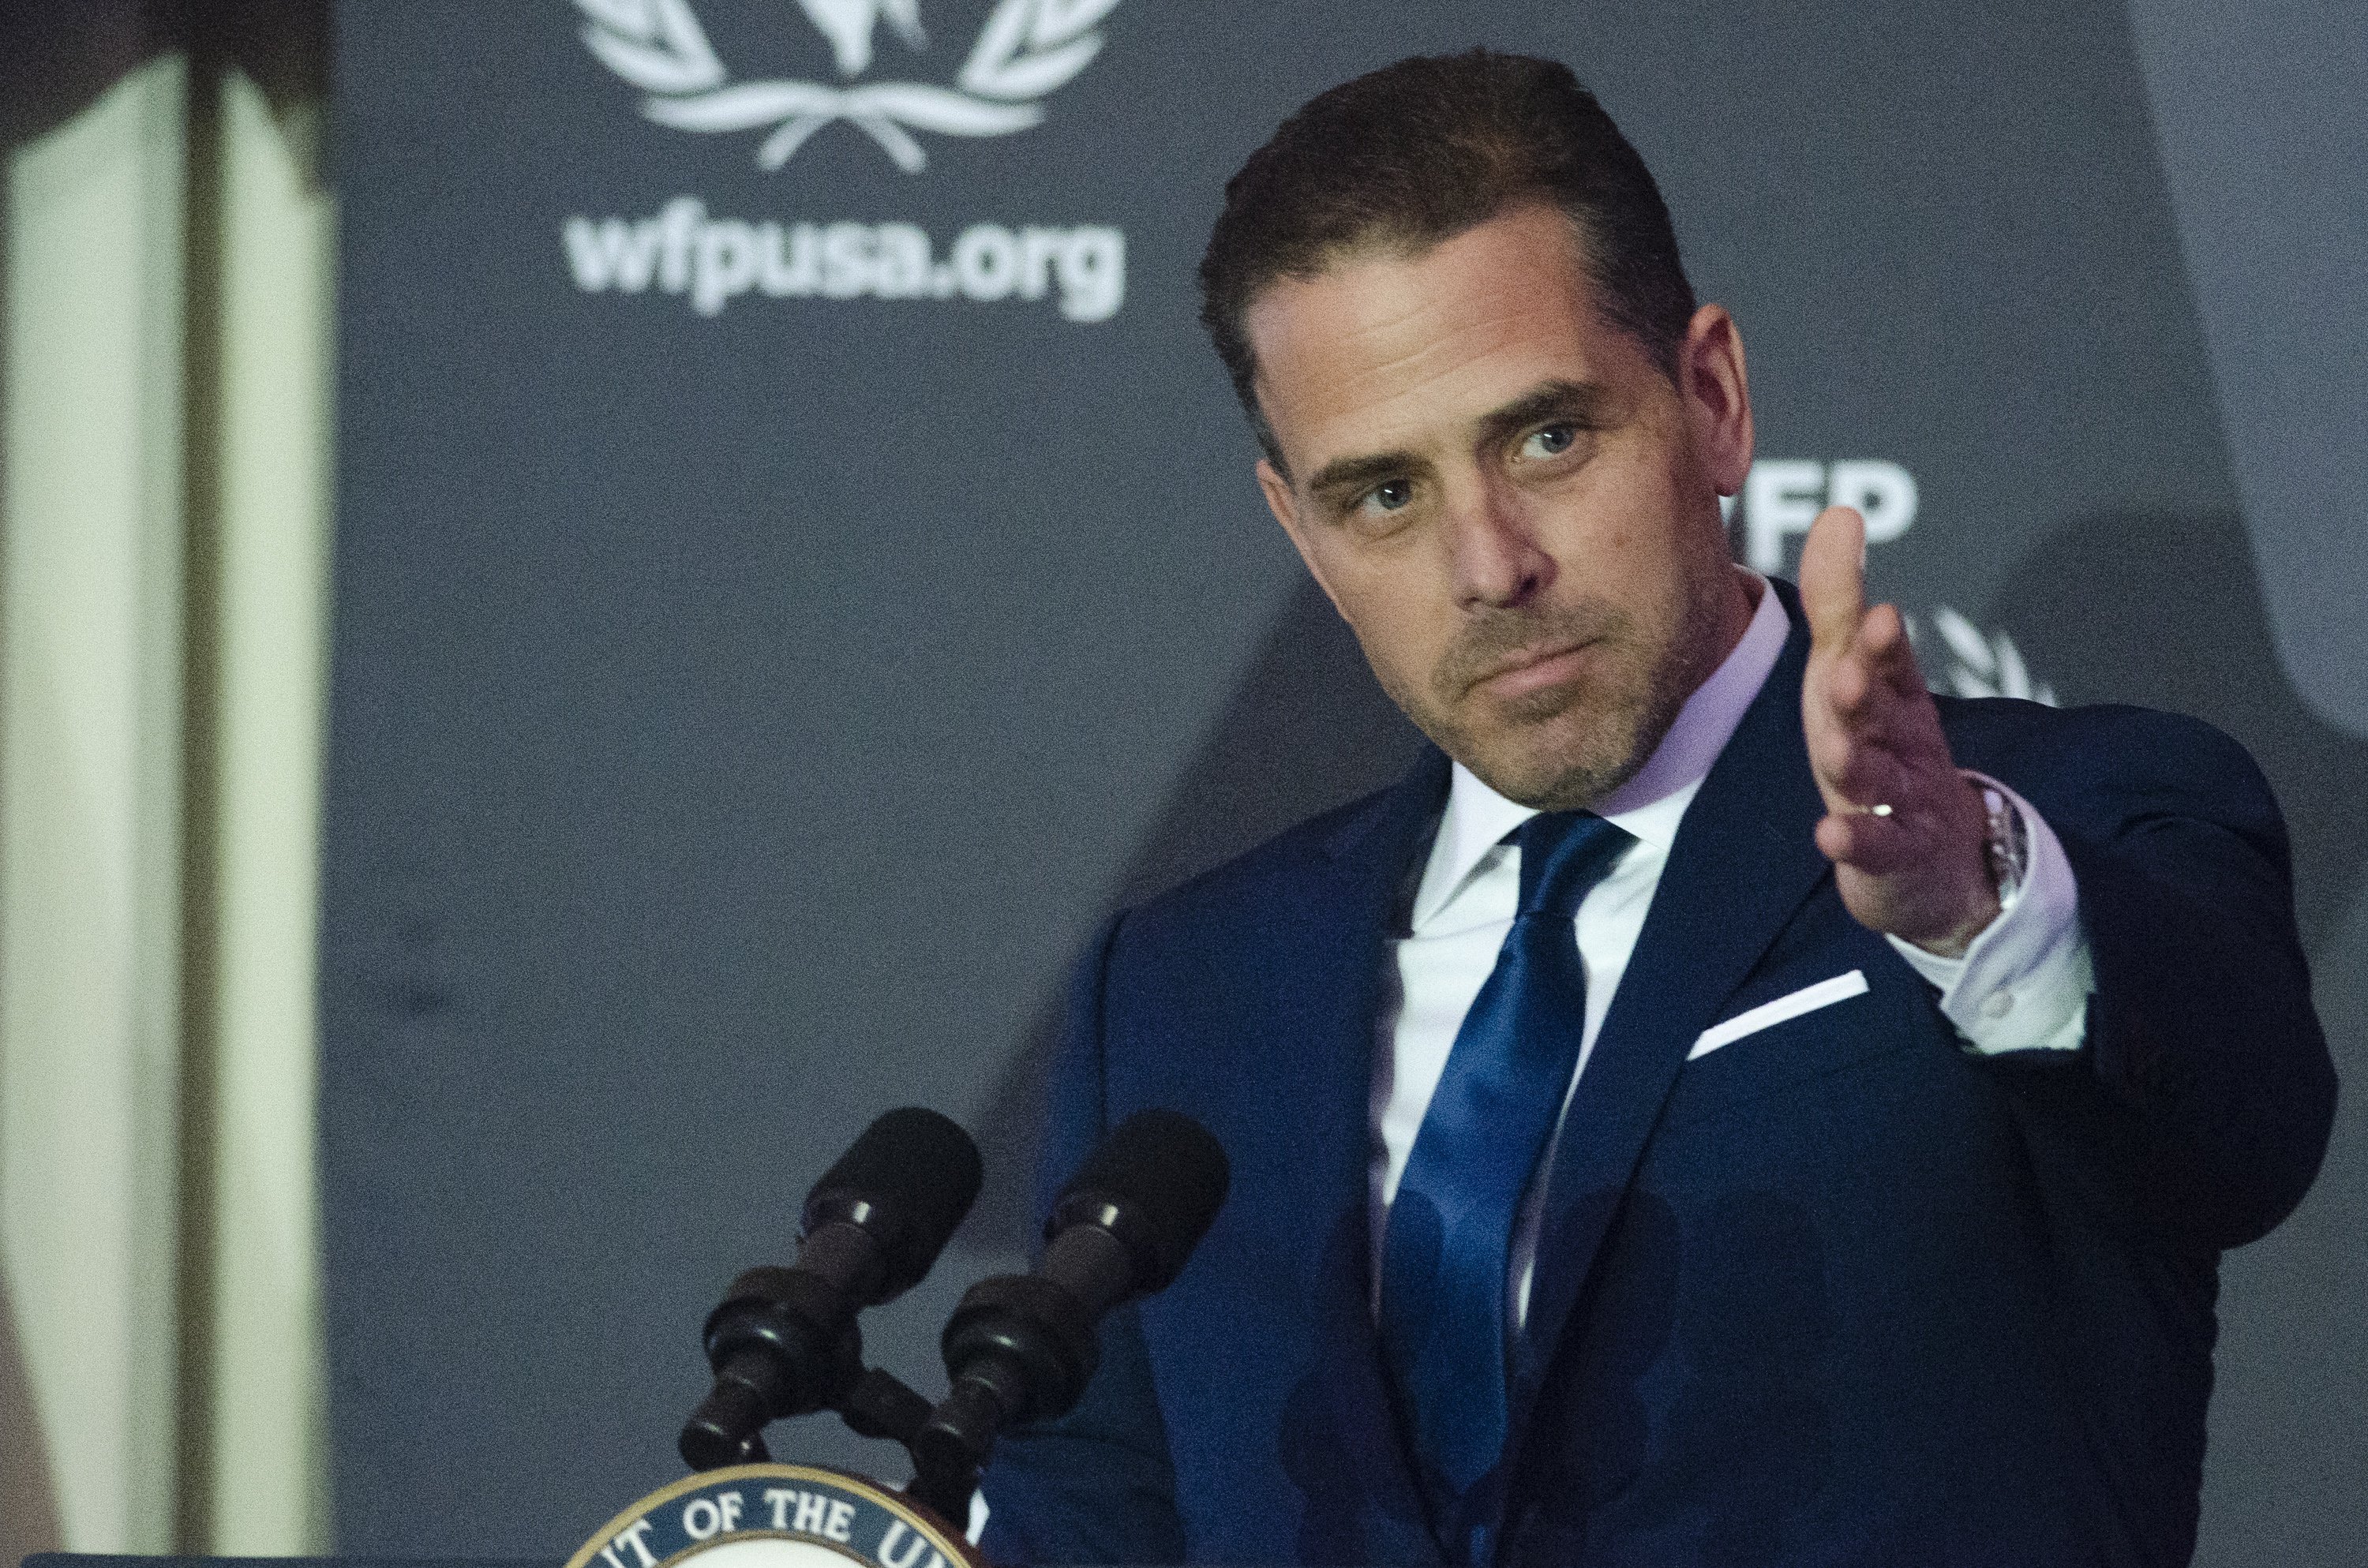 Hunter Biden speaks during the World Food Program USA's 2016 McGovern-Dole Leadership Award Ceremony on April 12, 2016, in Washington, DC. | Source: Getty Images.